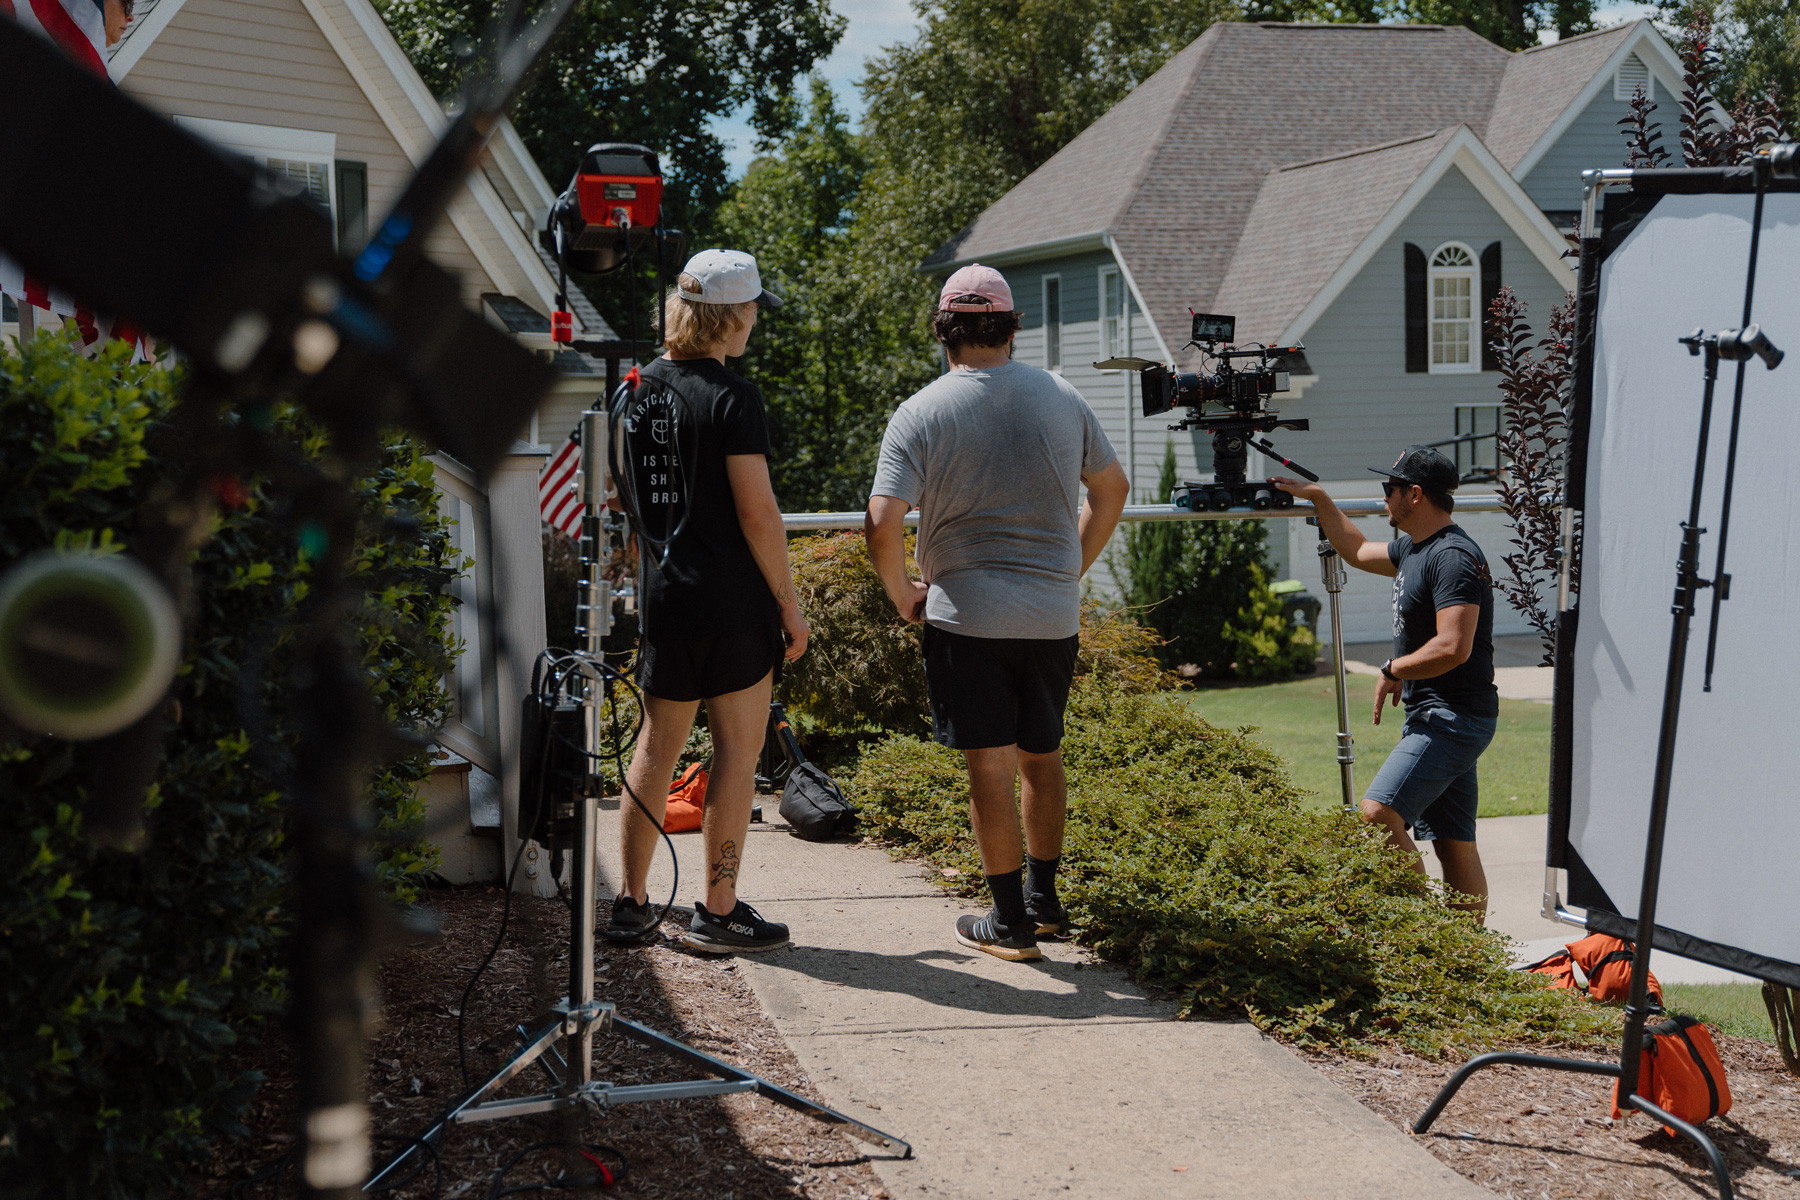  Film crew standing around the side of a house